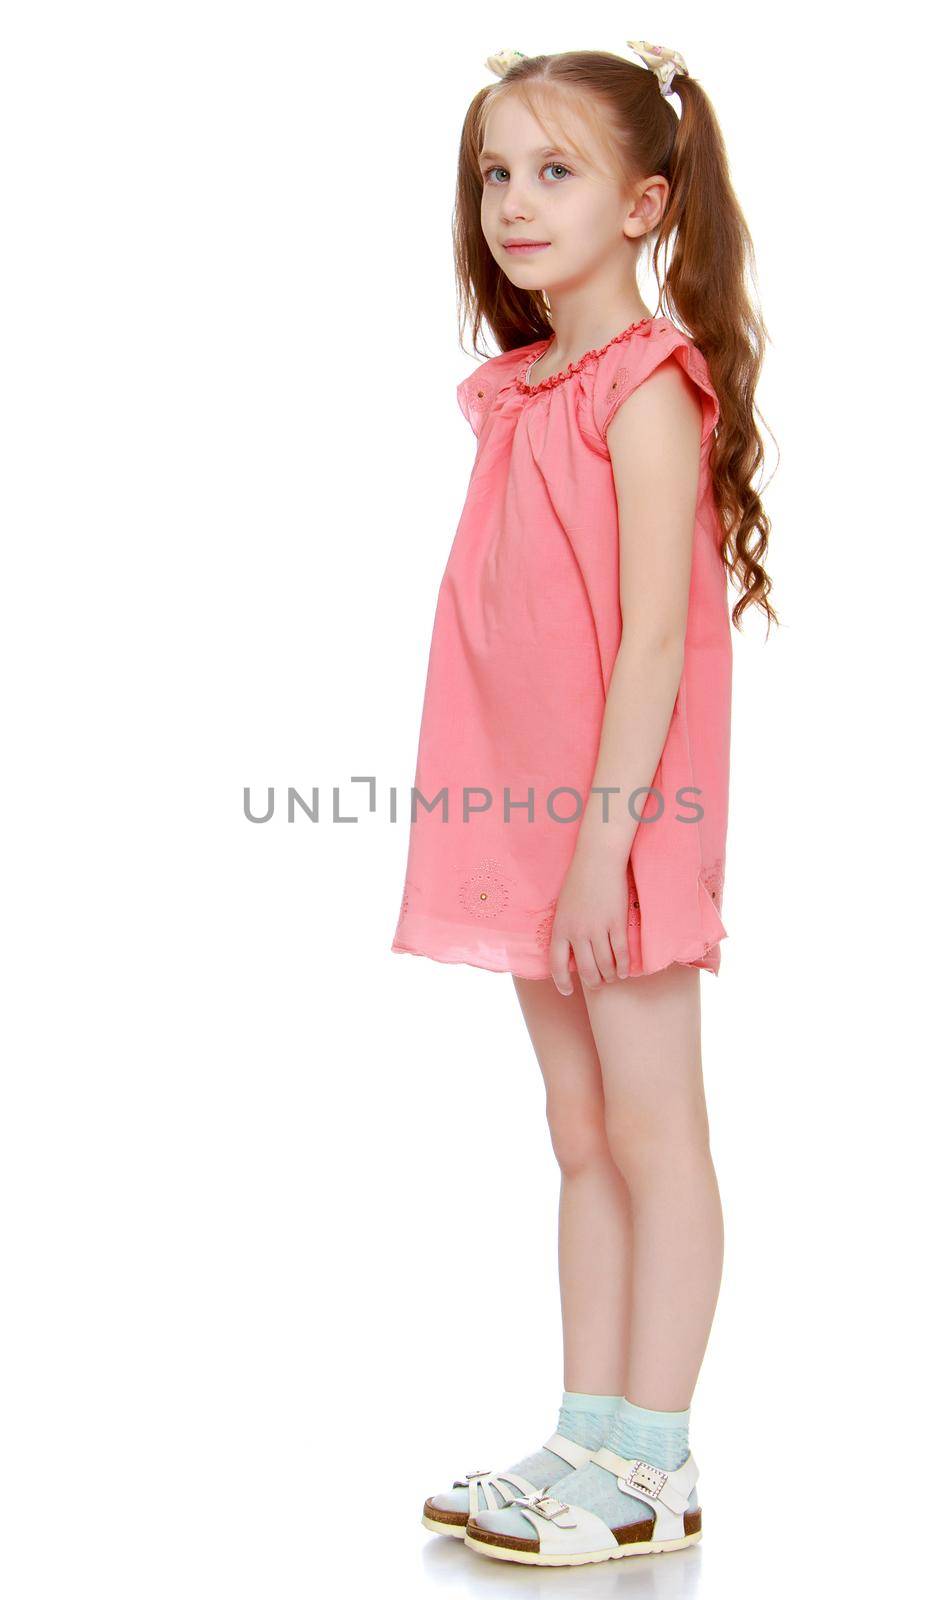 The doubting little girl with long pigtails to her waist and braided white bows. In short pink summer dress. Standing sideways to the camera - Isolated on white background